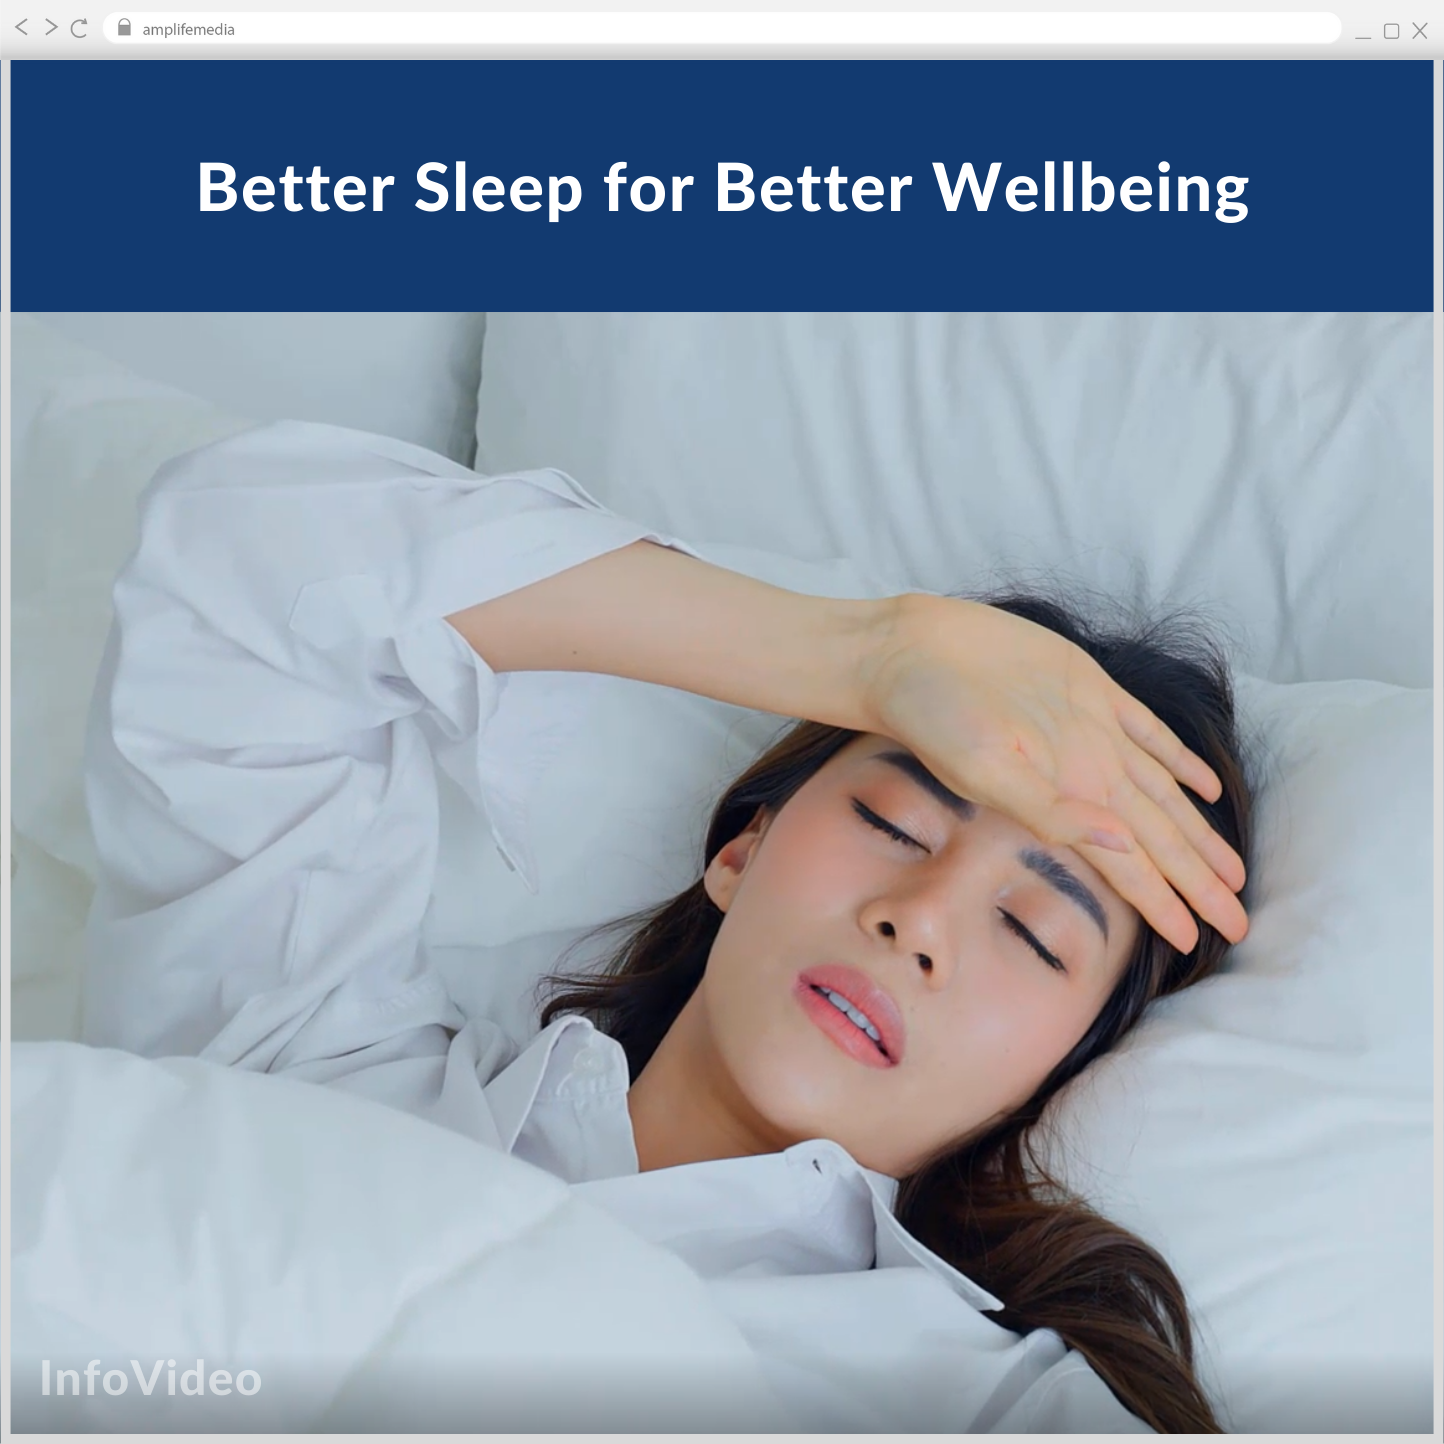 Subscription to Wellbeing Media: Better Sleep for Better Wellbeing IV 822